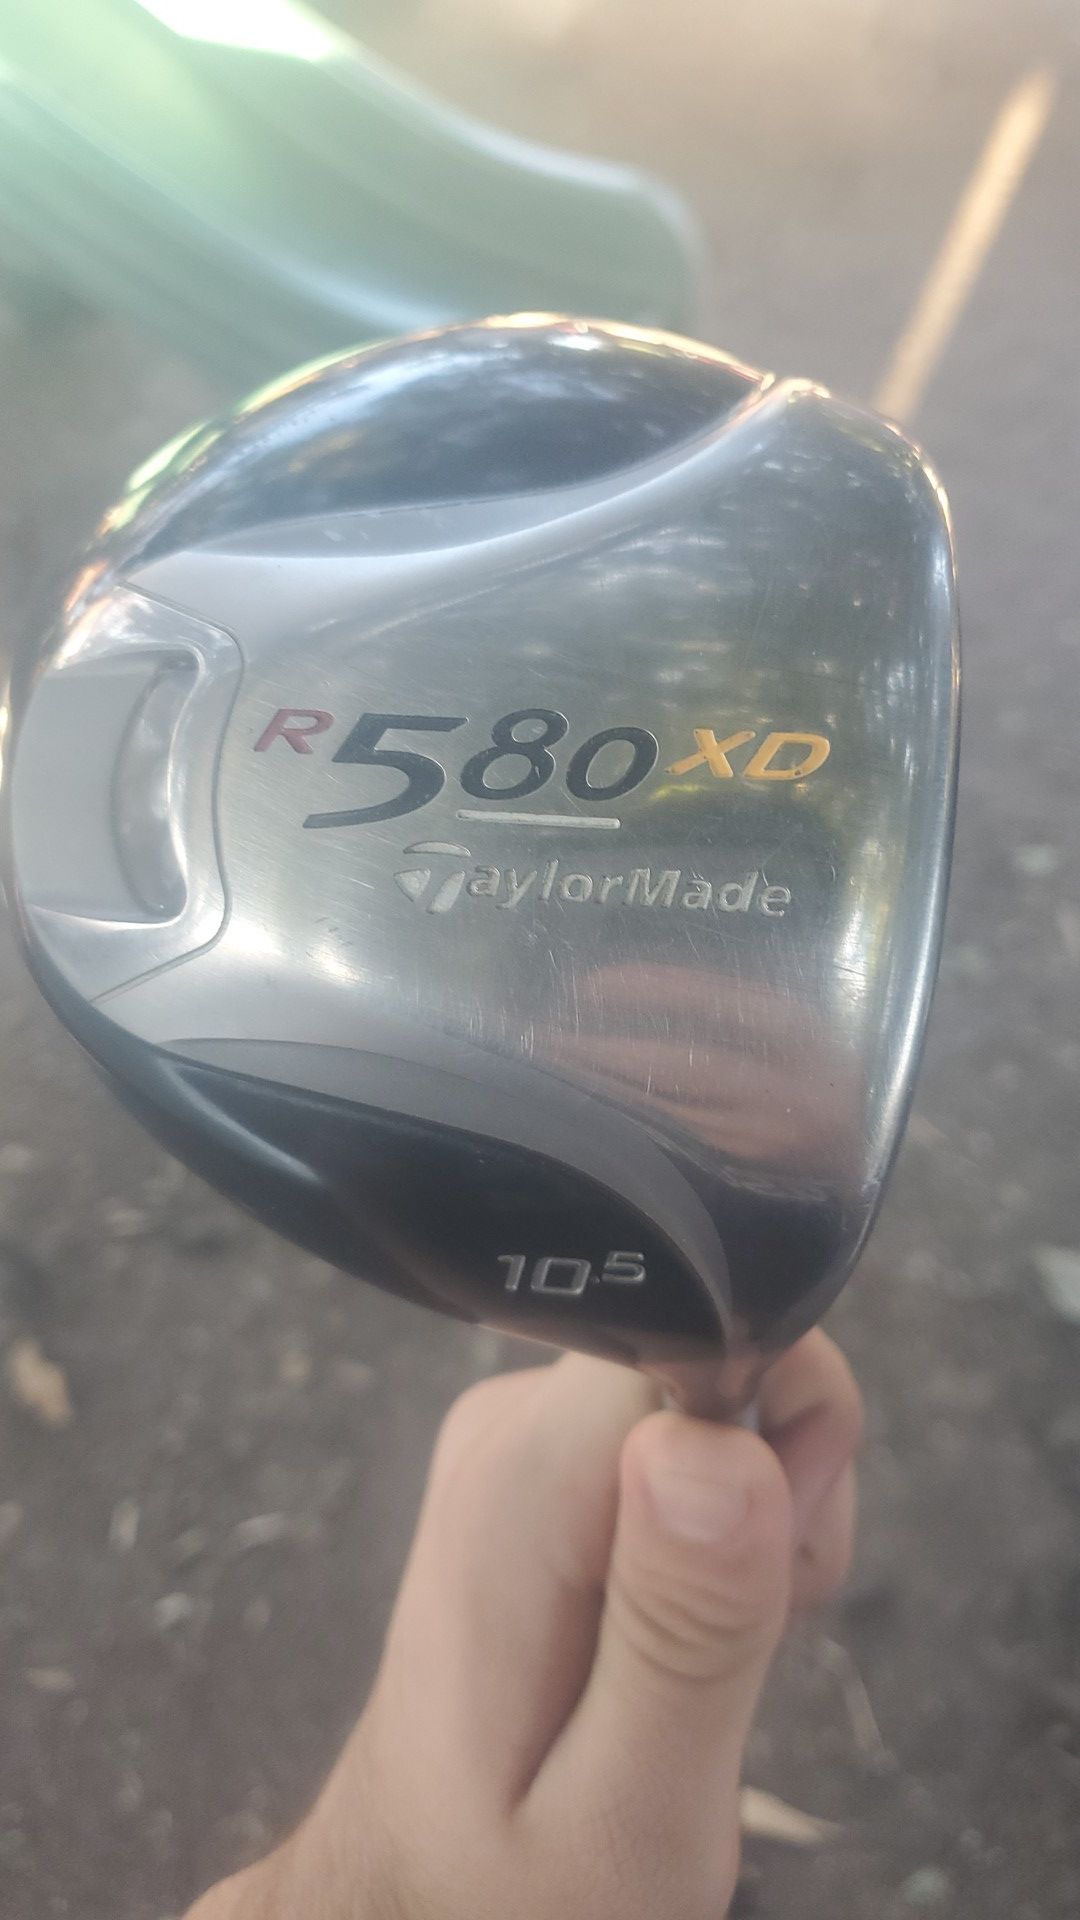 Taylormade r580 xd 10.5